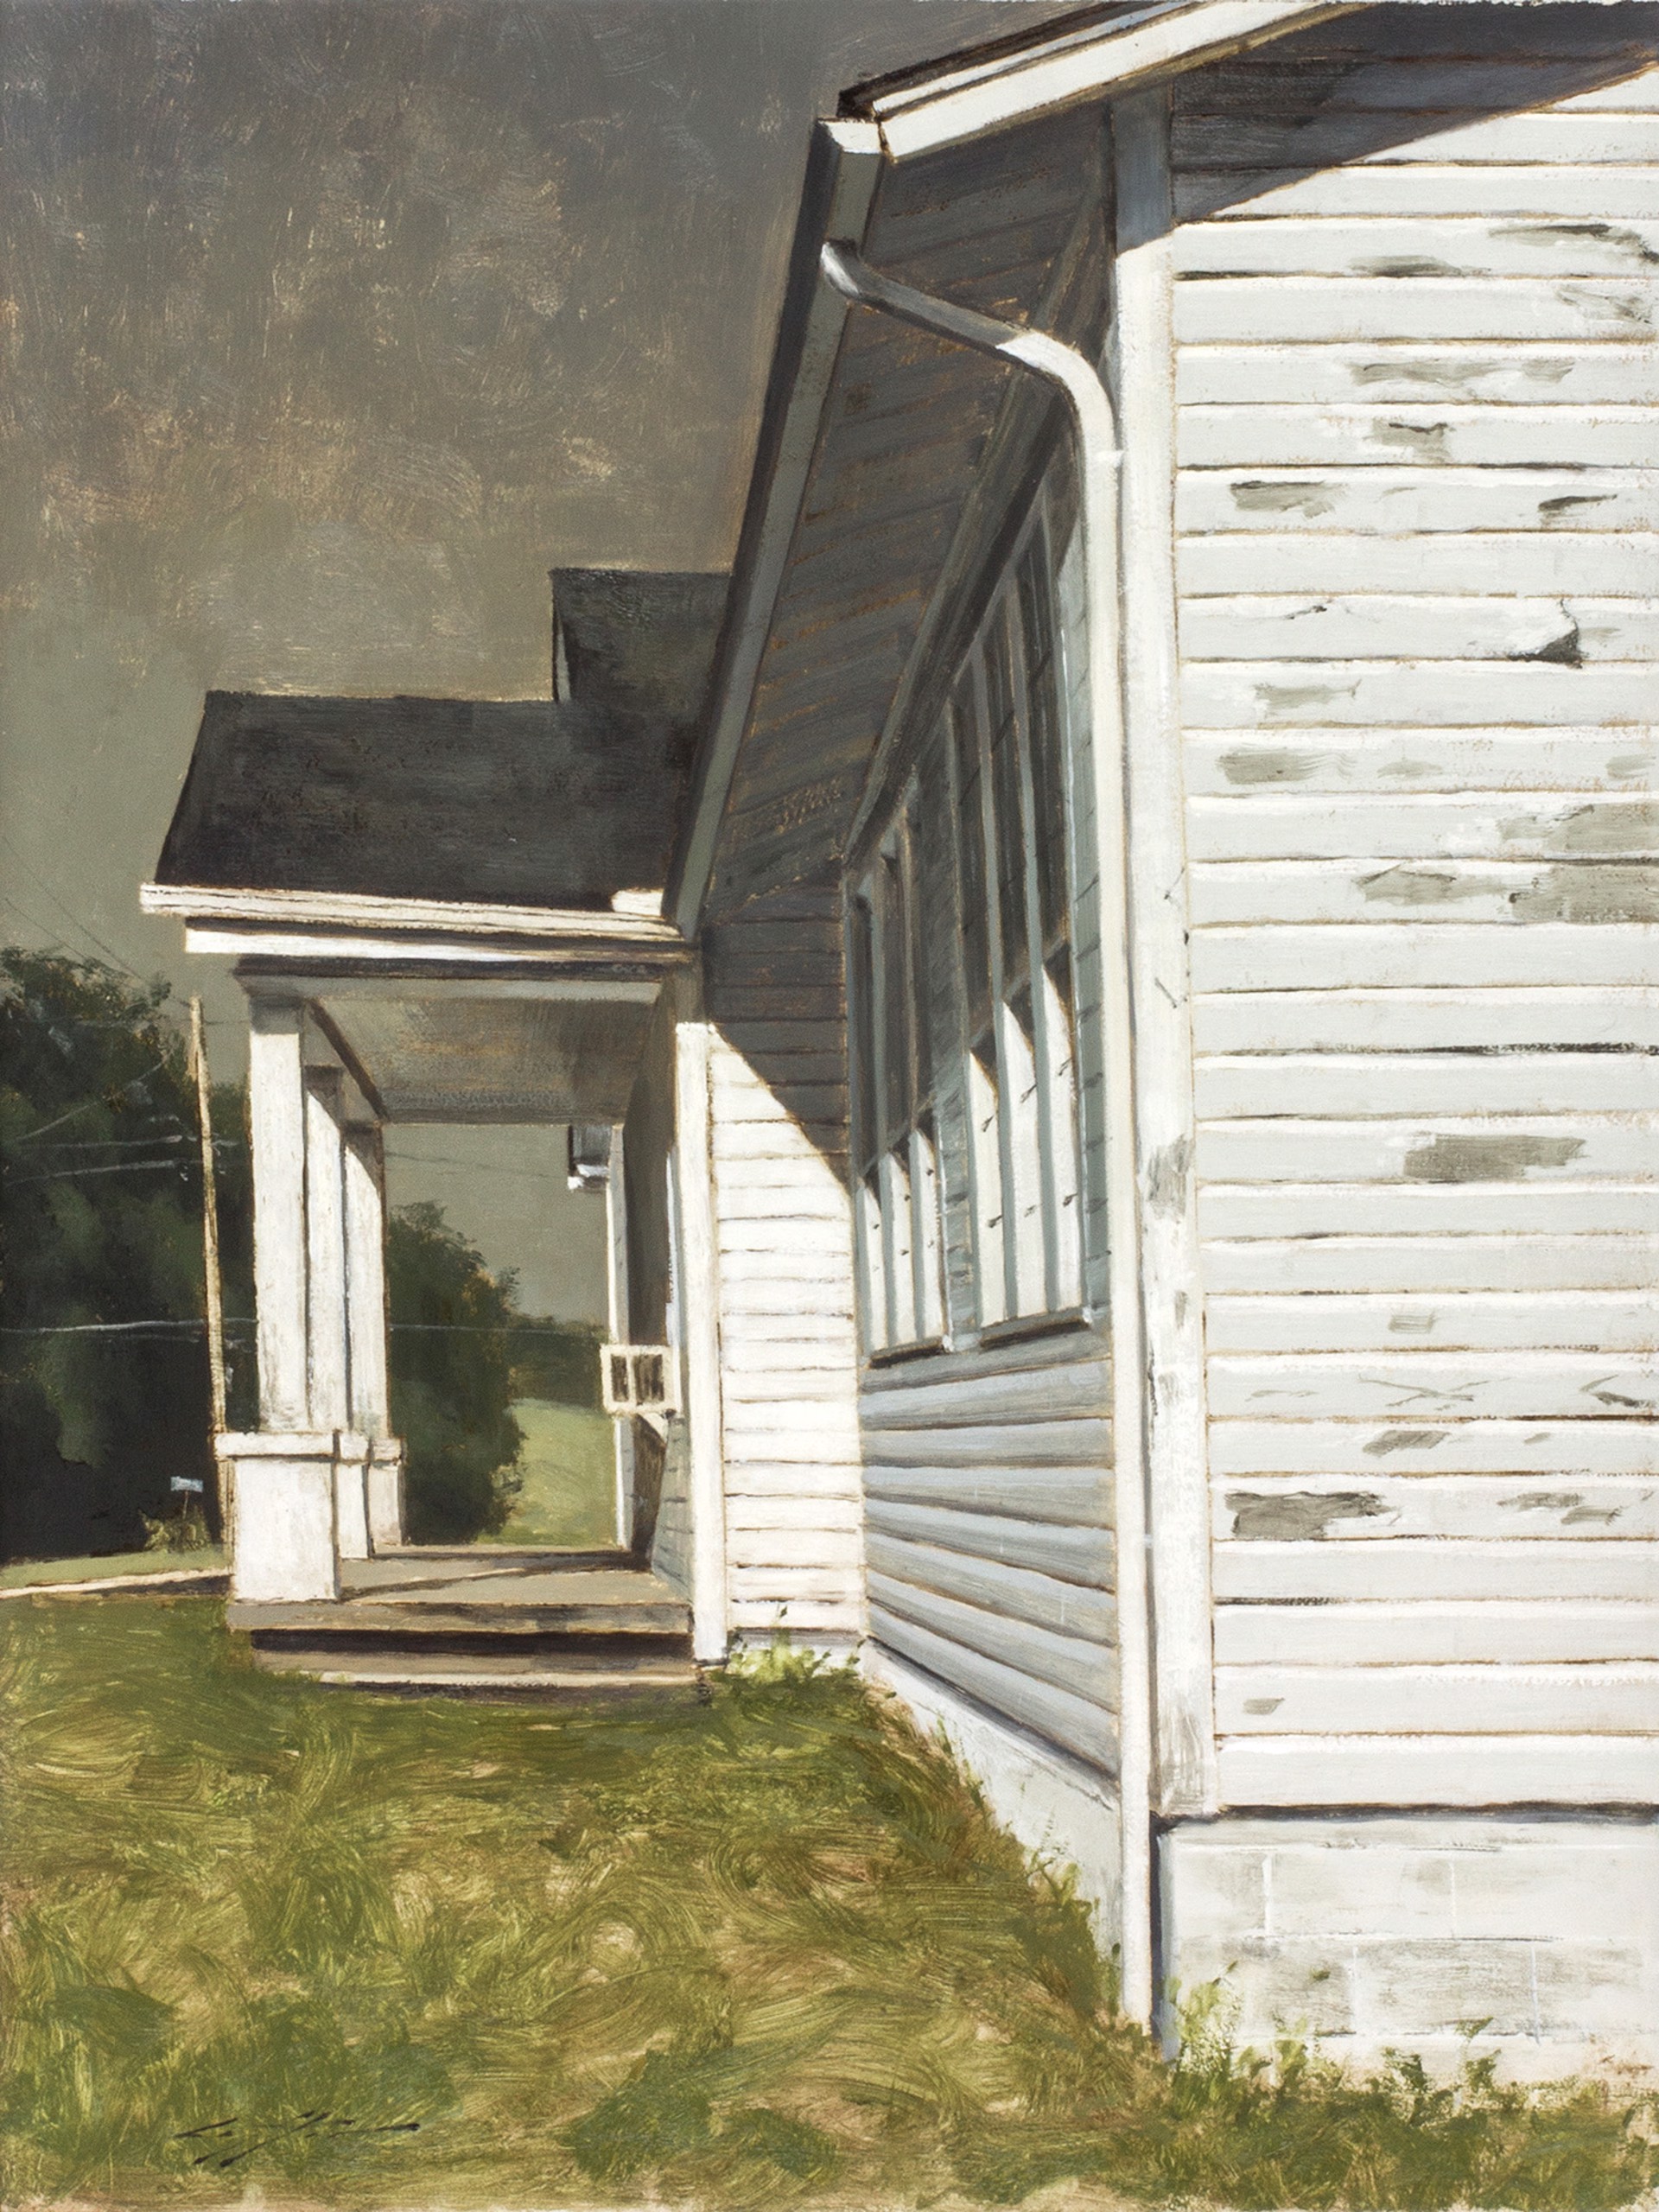 MATTHEW J CUTTER, "Leaning" by Oil Painters of America